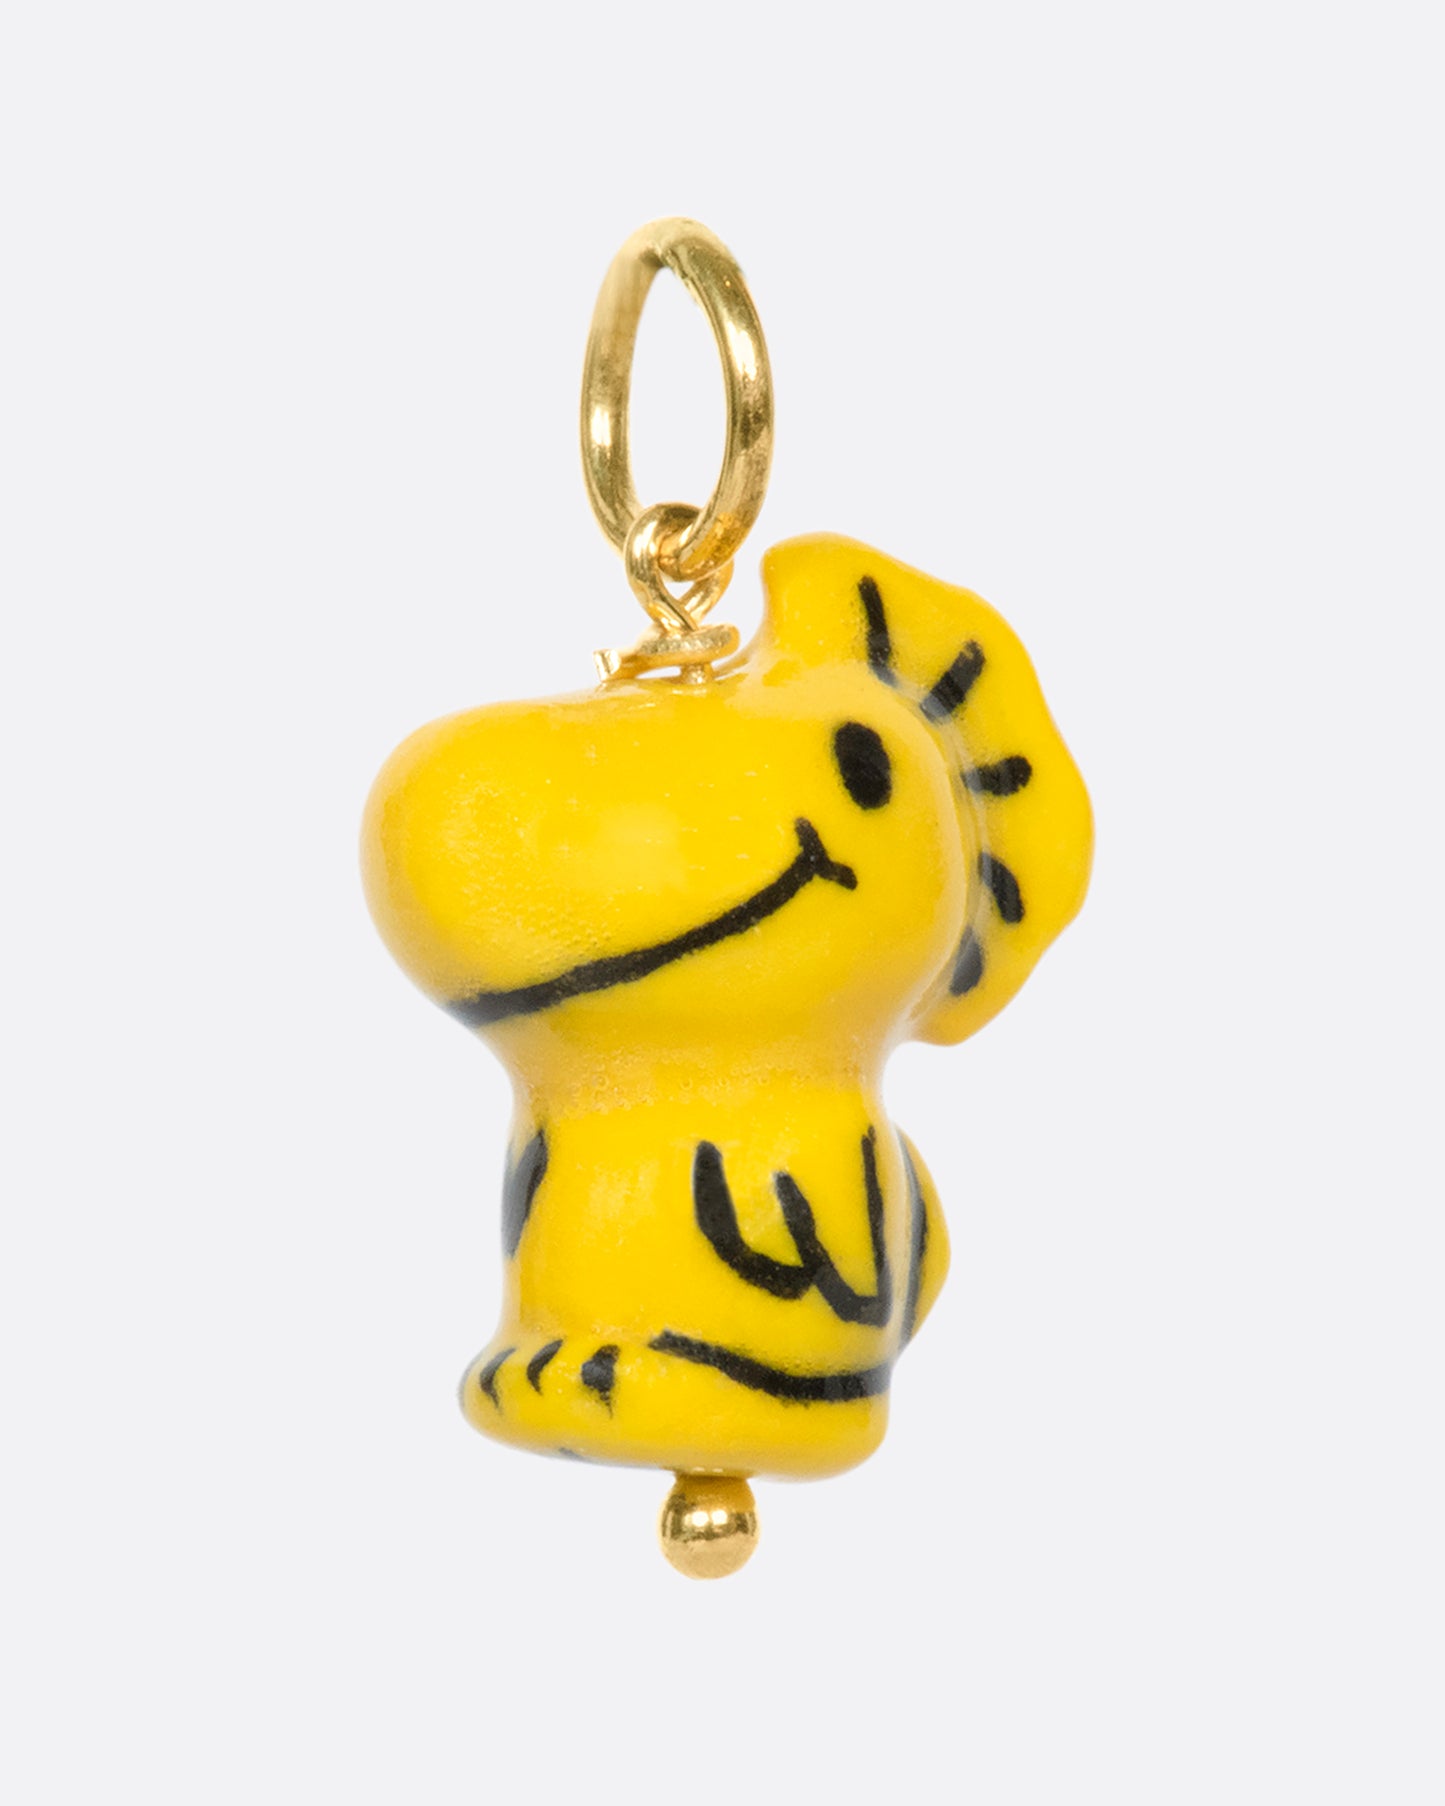 Peanuts lovers rejoice! Here we have a little Woodstock that can fly in circles around your head or just hang from your charm bracelet.